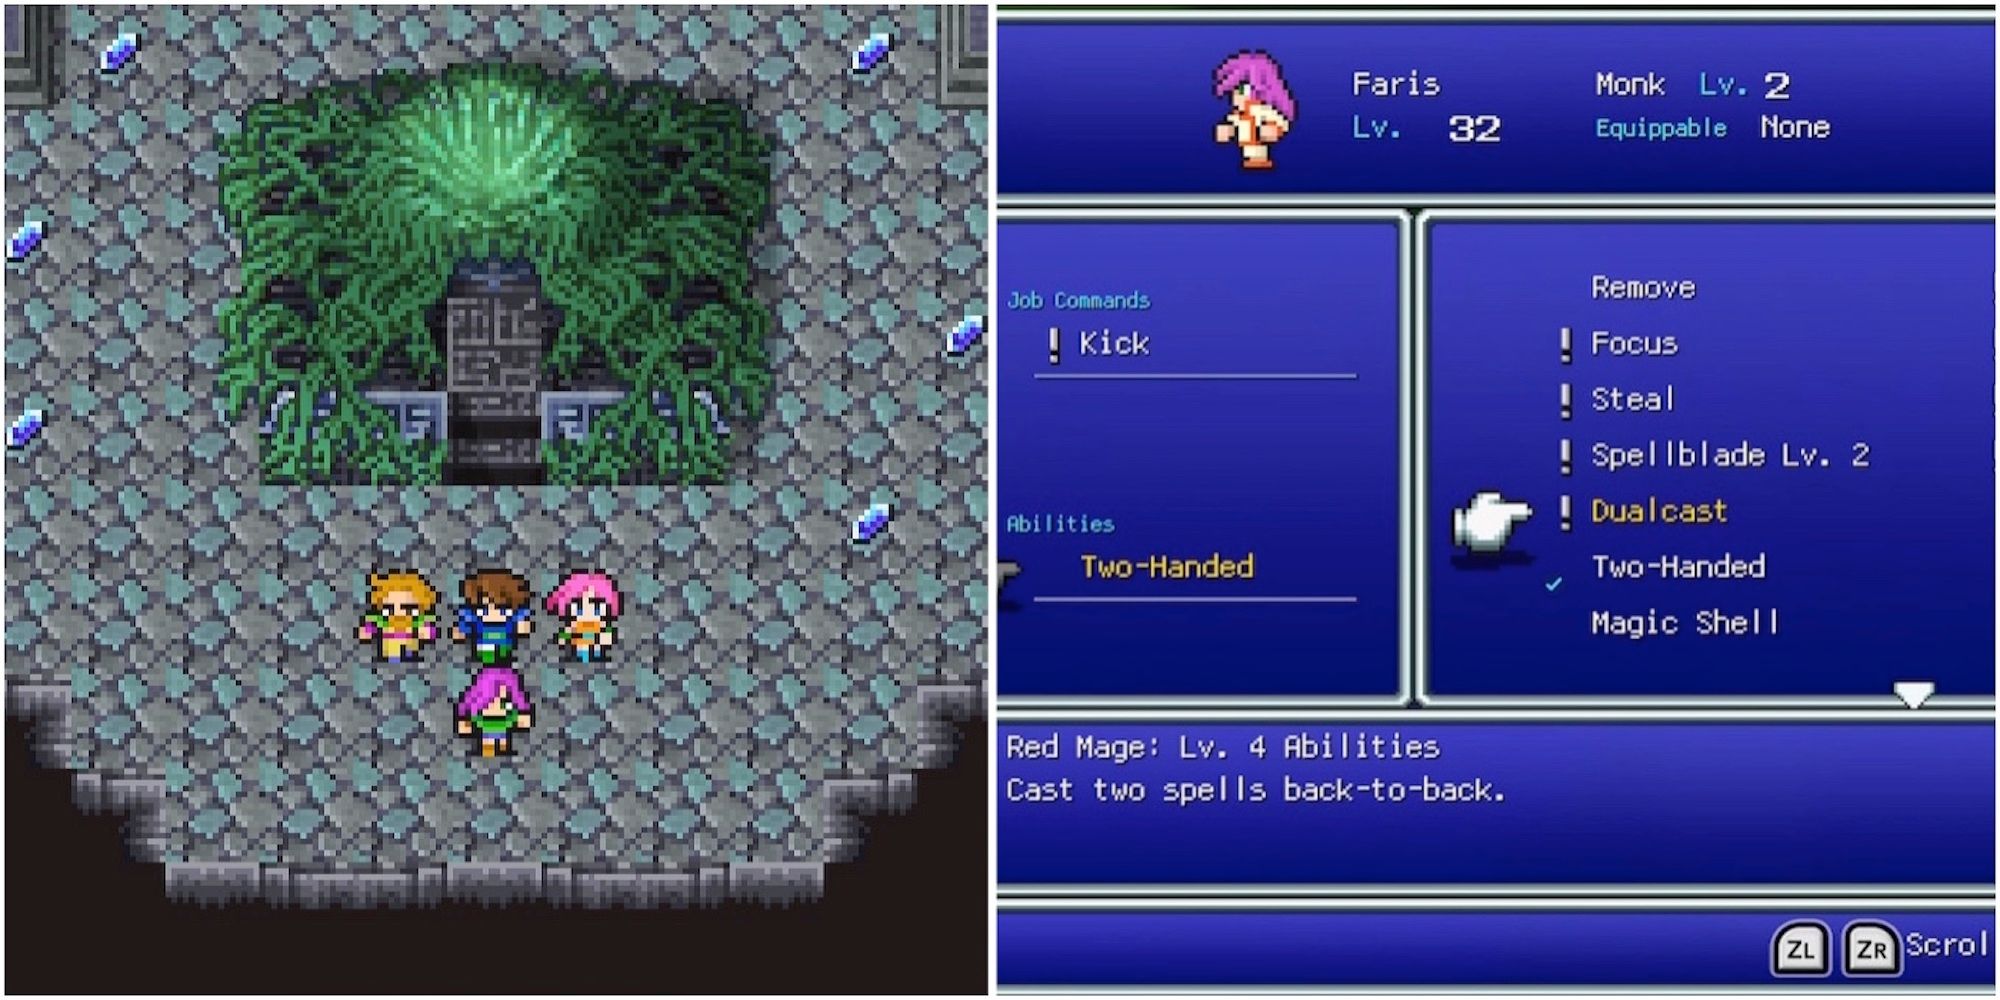 A cutscene featuring characters and Dualcast ability in Final Fantasy 5